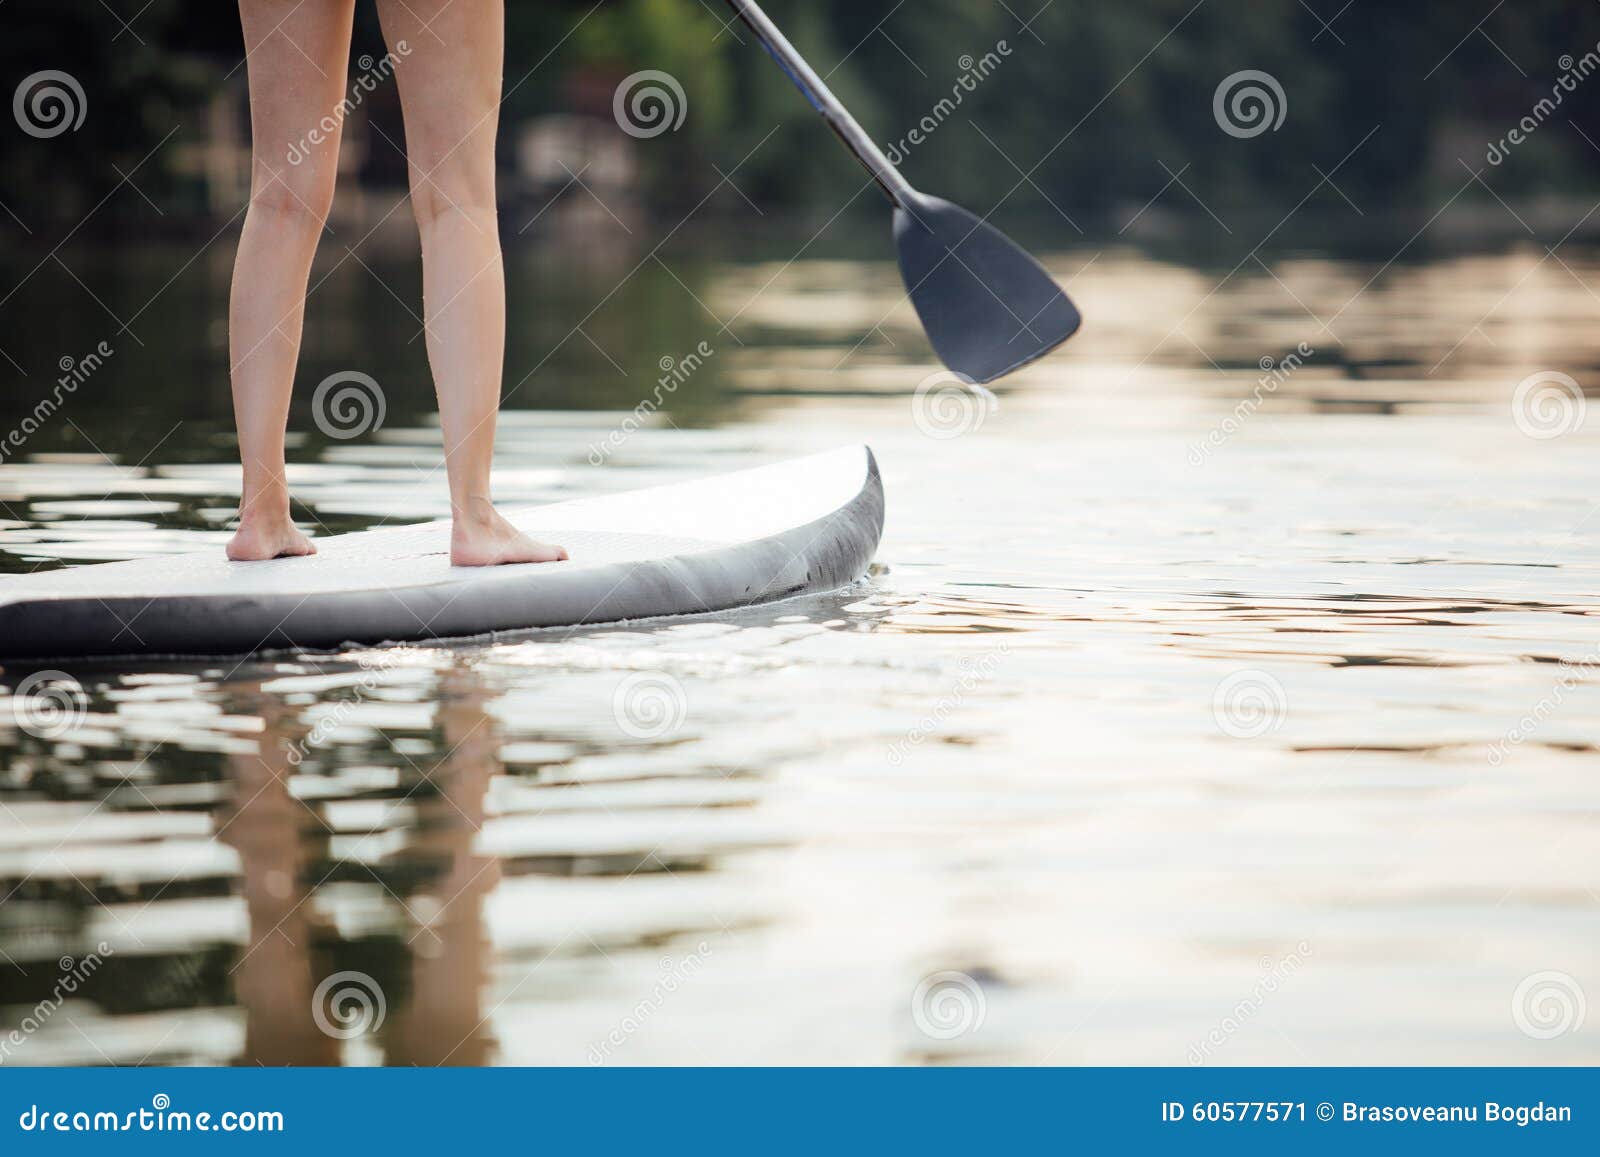 Clouse-up of a Woman Legs on Paddleboard Stock Image - Image of ...